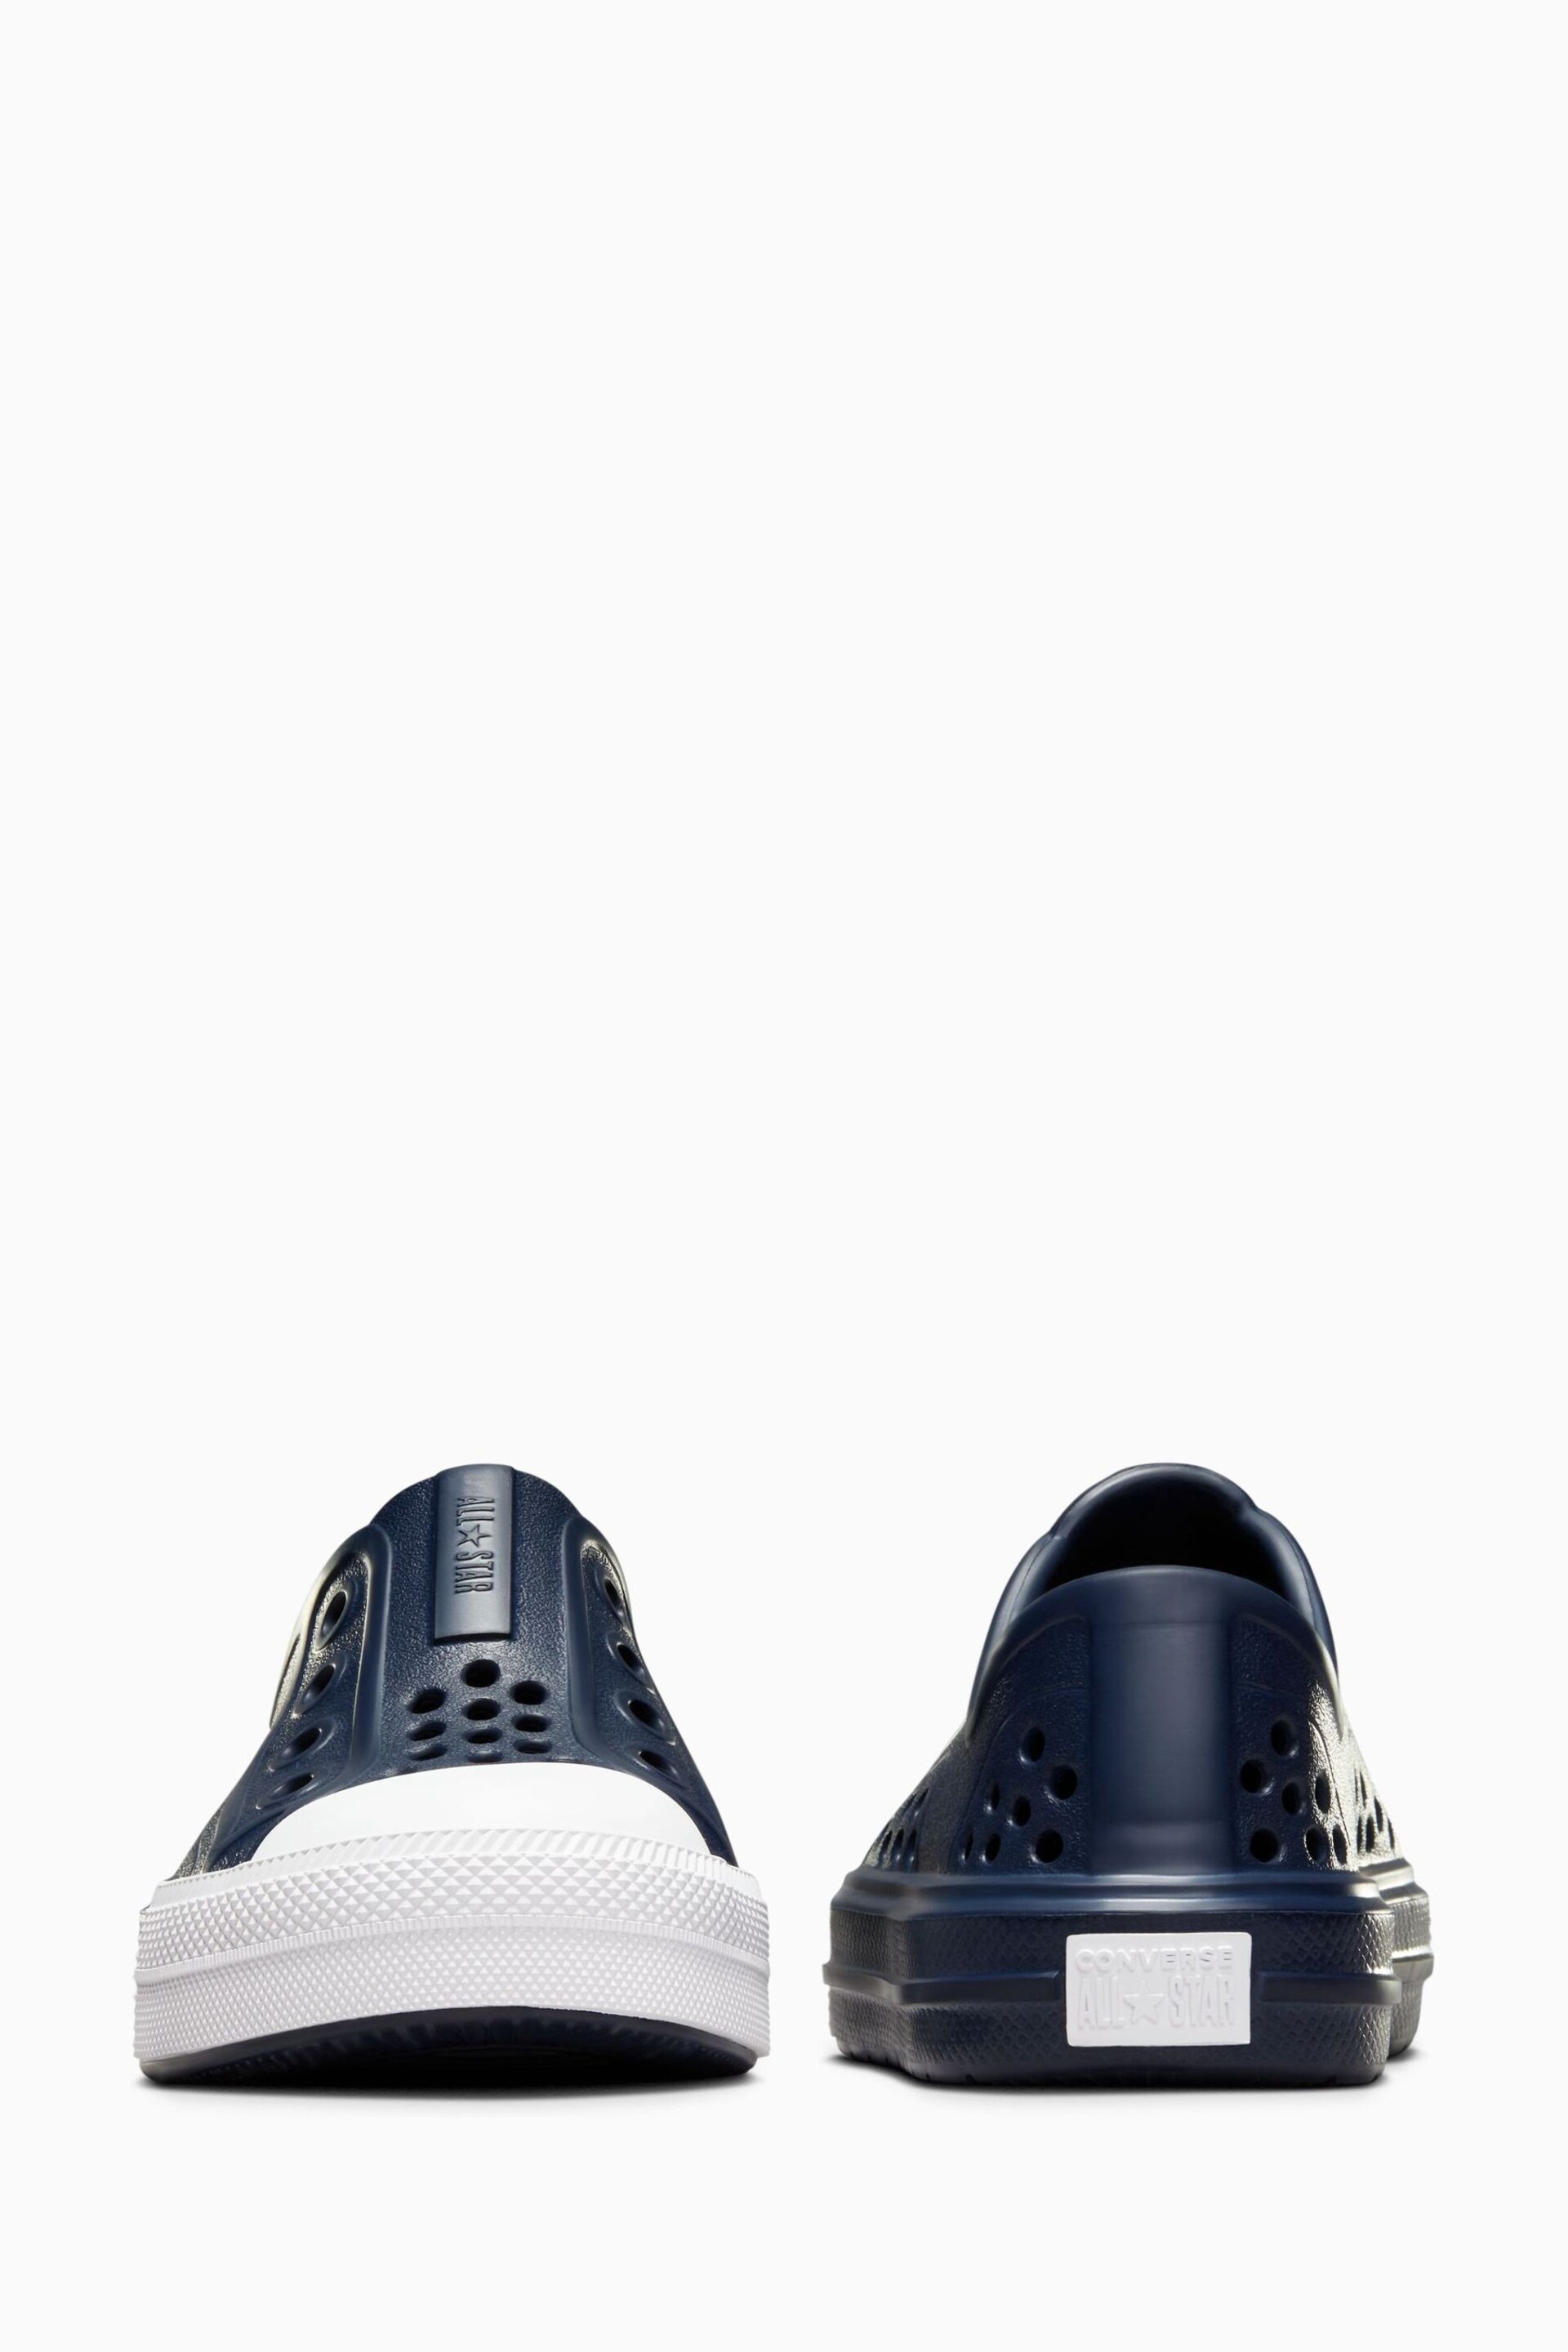 Converse Navy Play Lite Toddler Sandals - Image 7 of 10